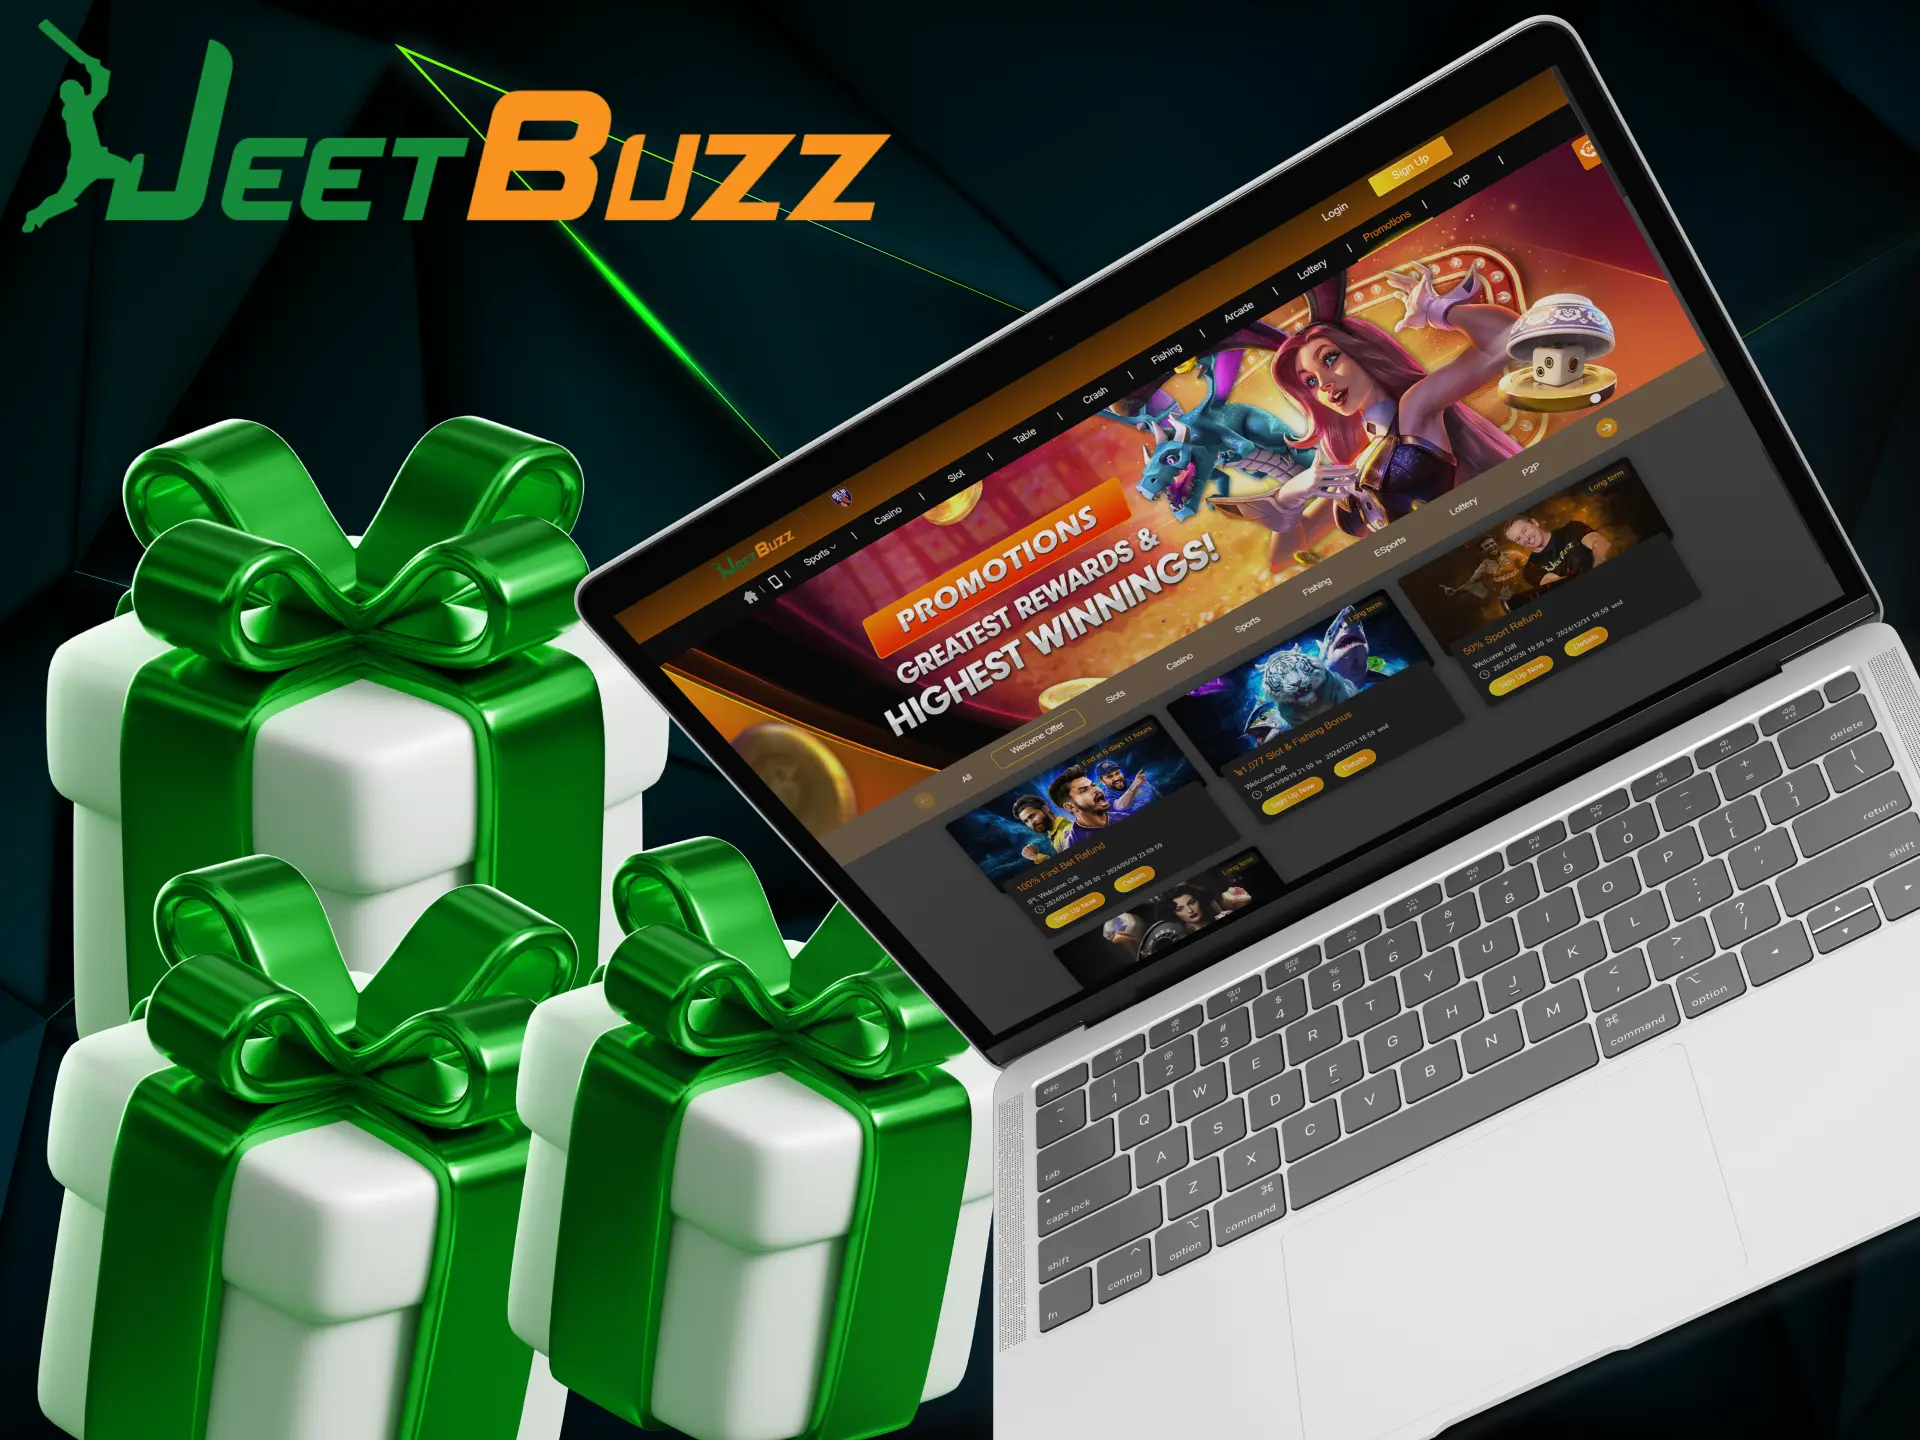 JeetBuzz gives every player a welcome bonus for cricket betting after registration.